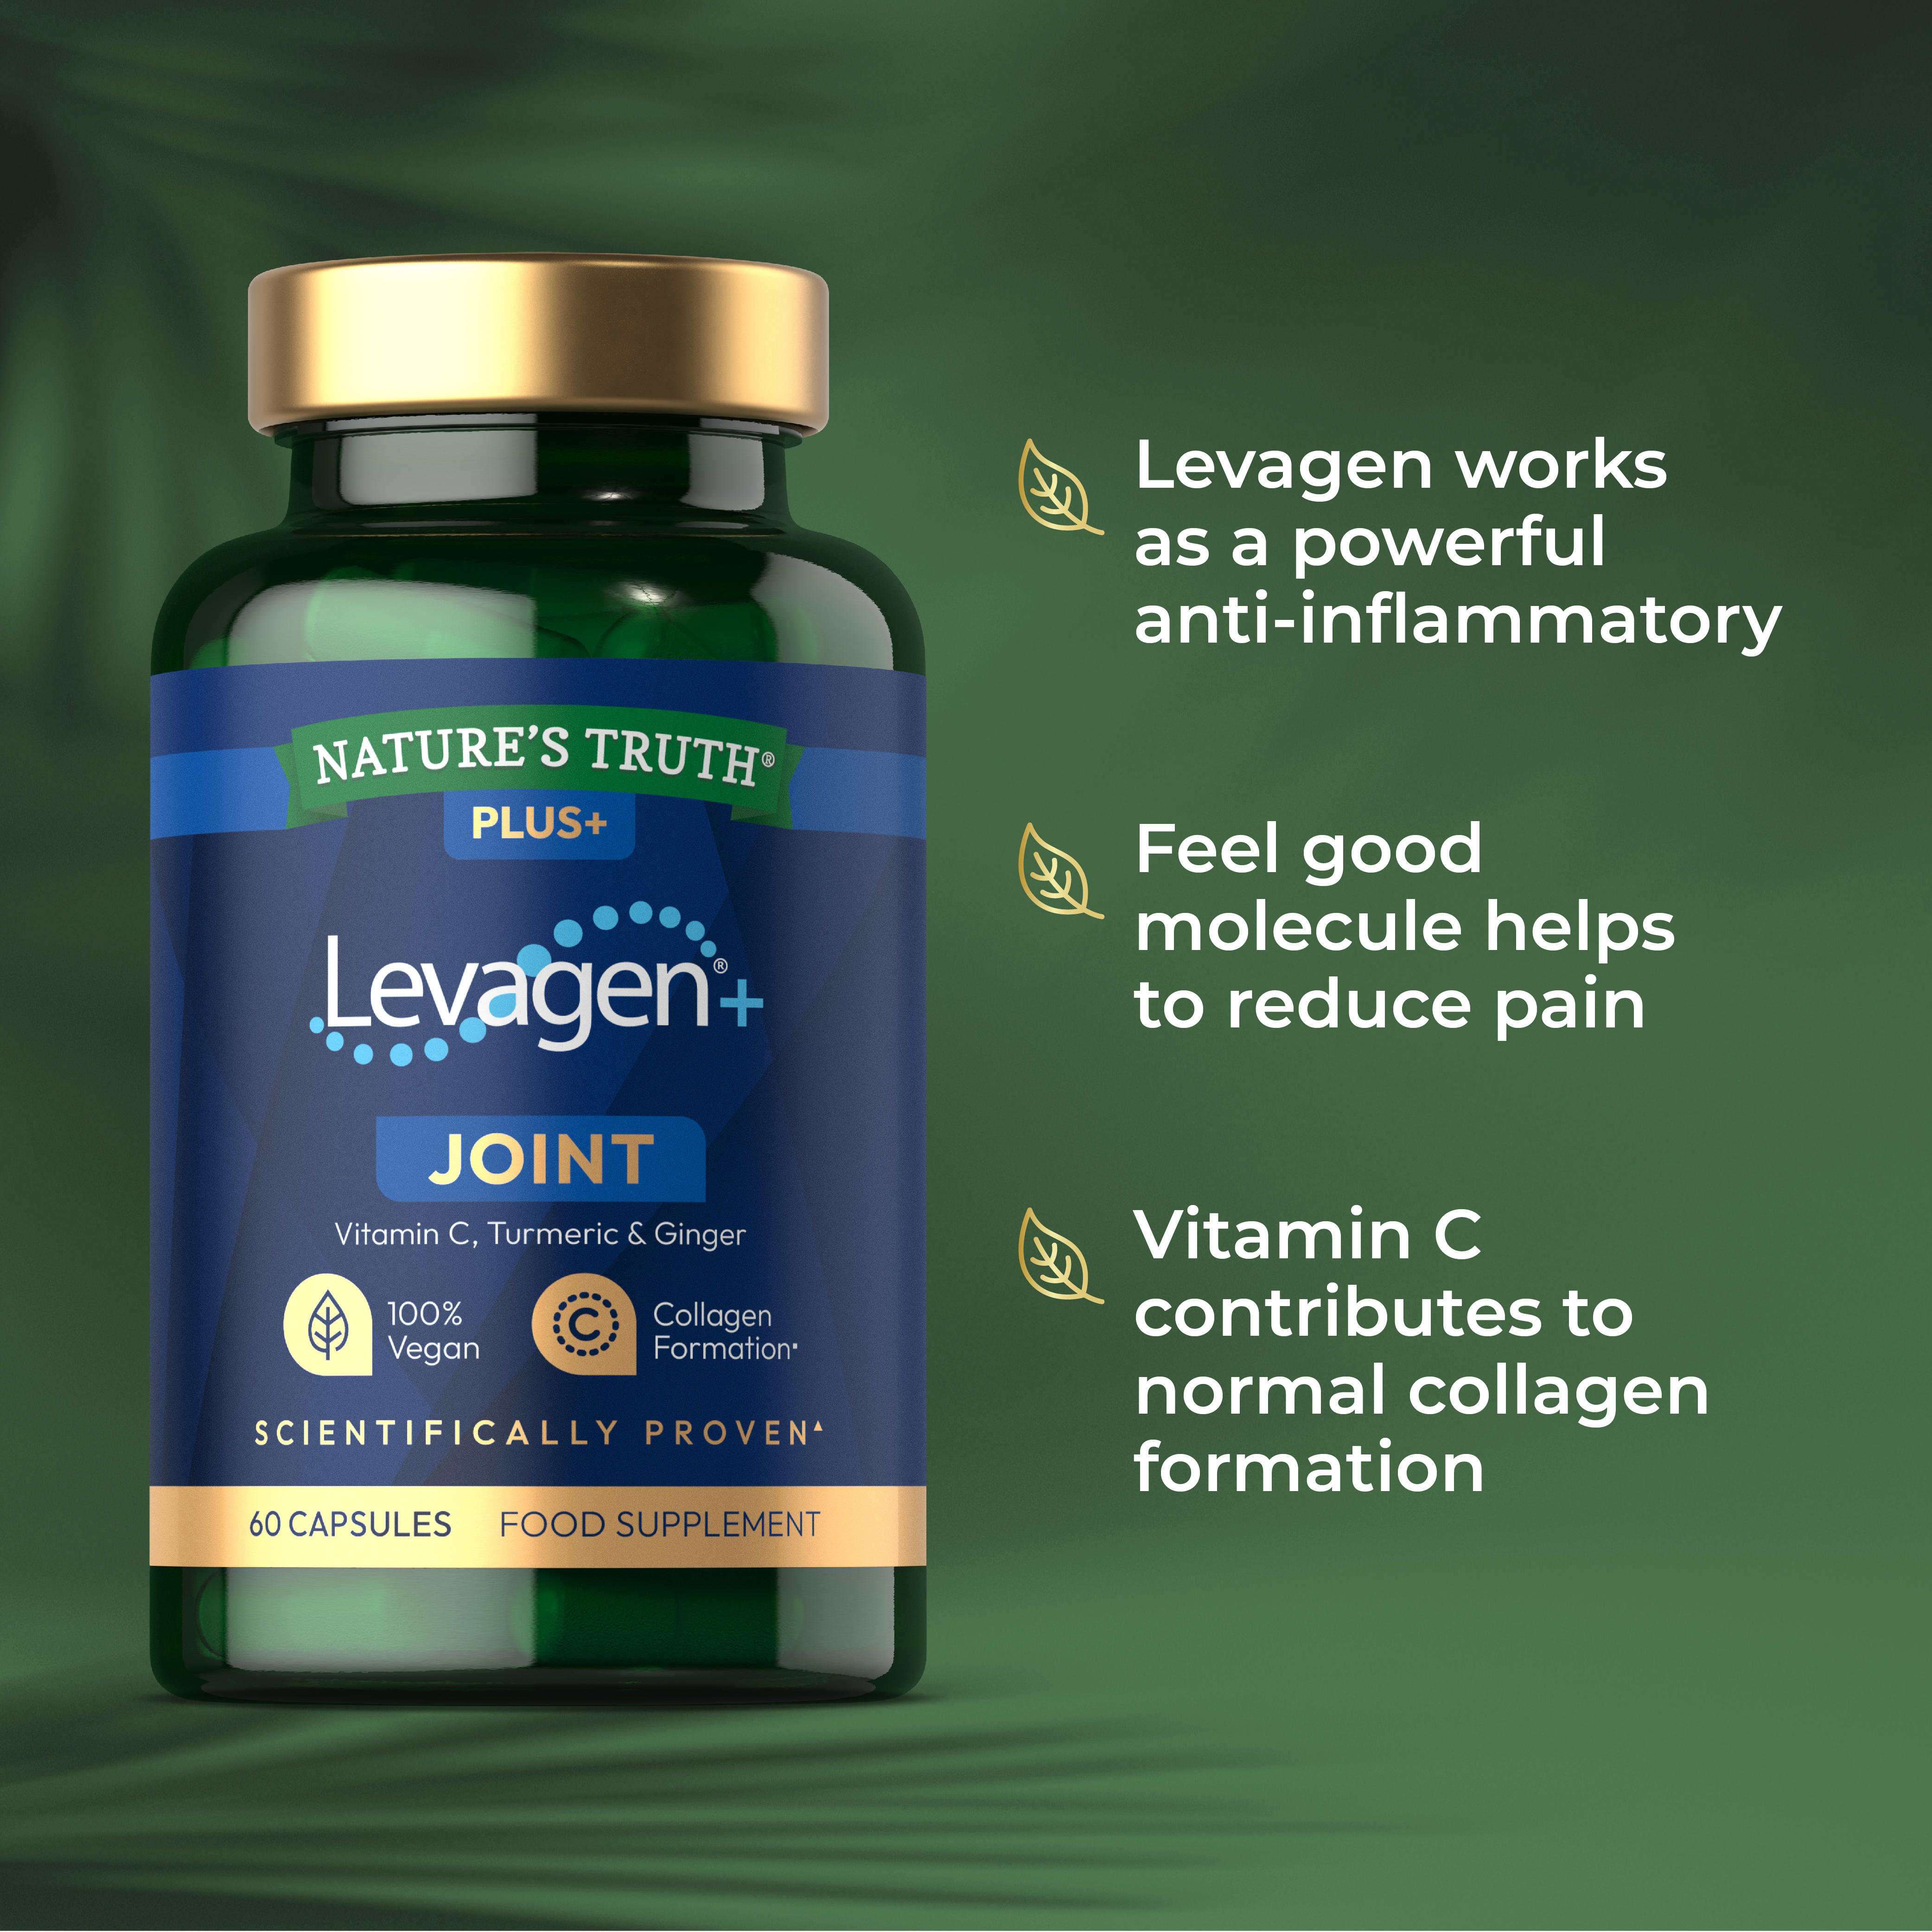 levagen works as a powerful anti-inflammatory, feel good molecule helps to reduce pain